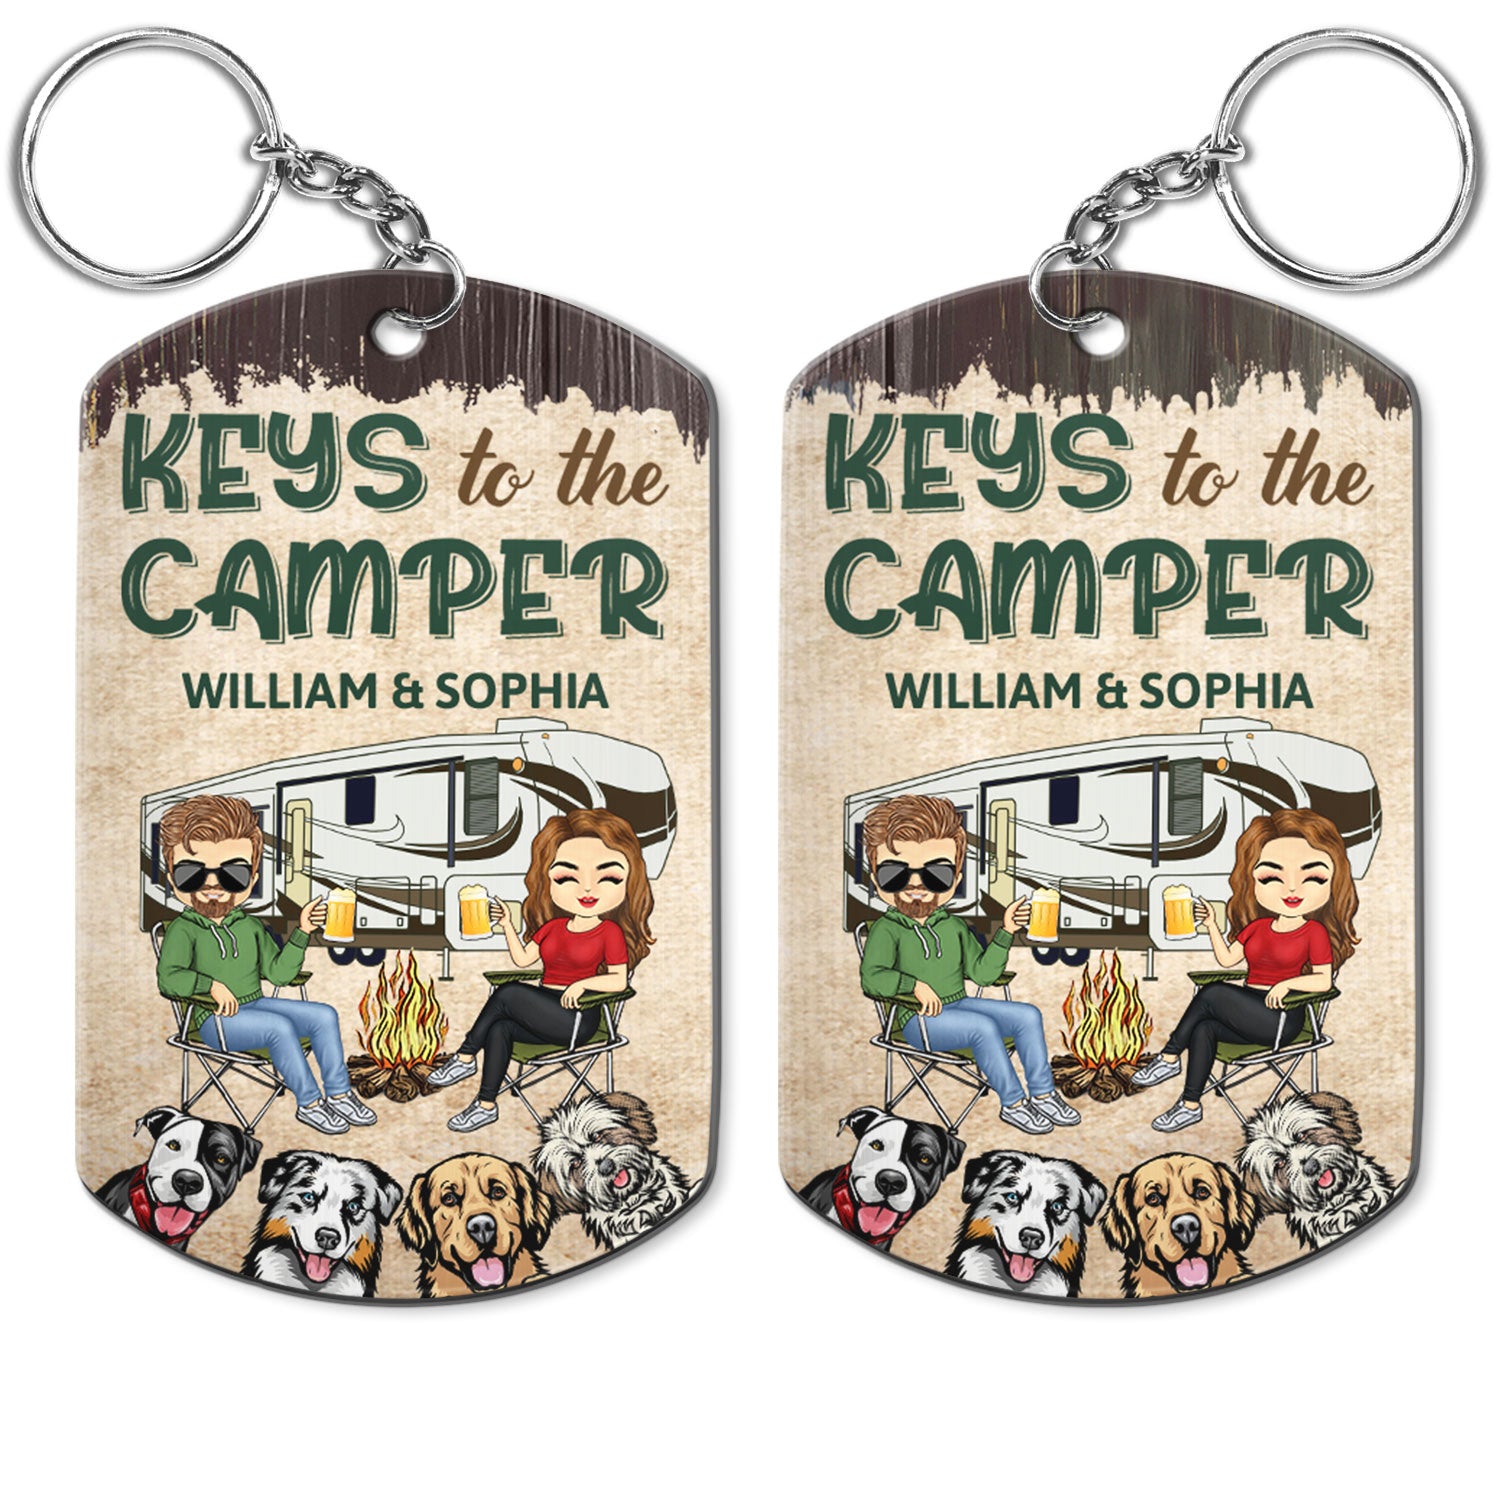 Keys To The Camper Dogs Cats - Anniversary, Loving Gifts For Couples, Husband, Wife, Camping Lovers - Personalized Aluminum Keychain